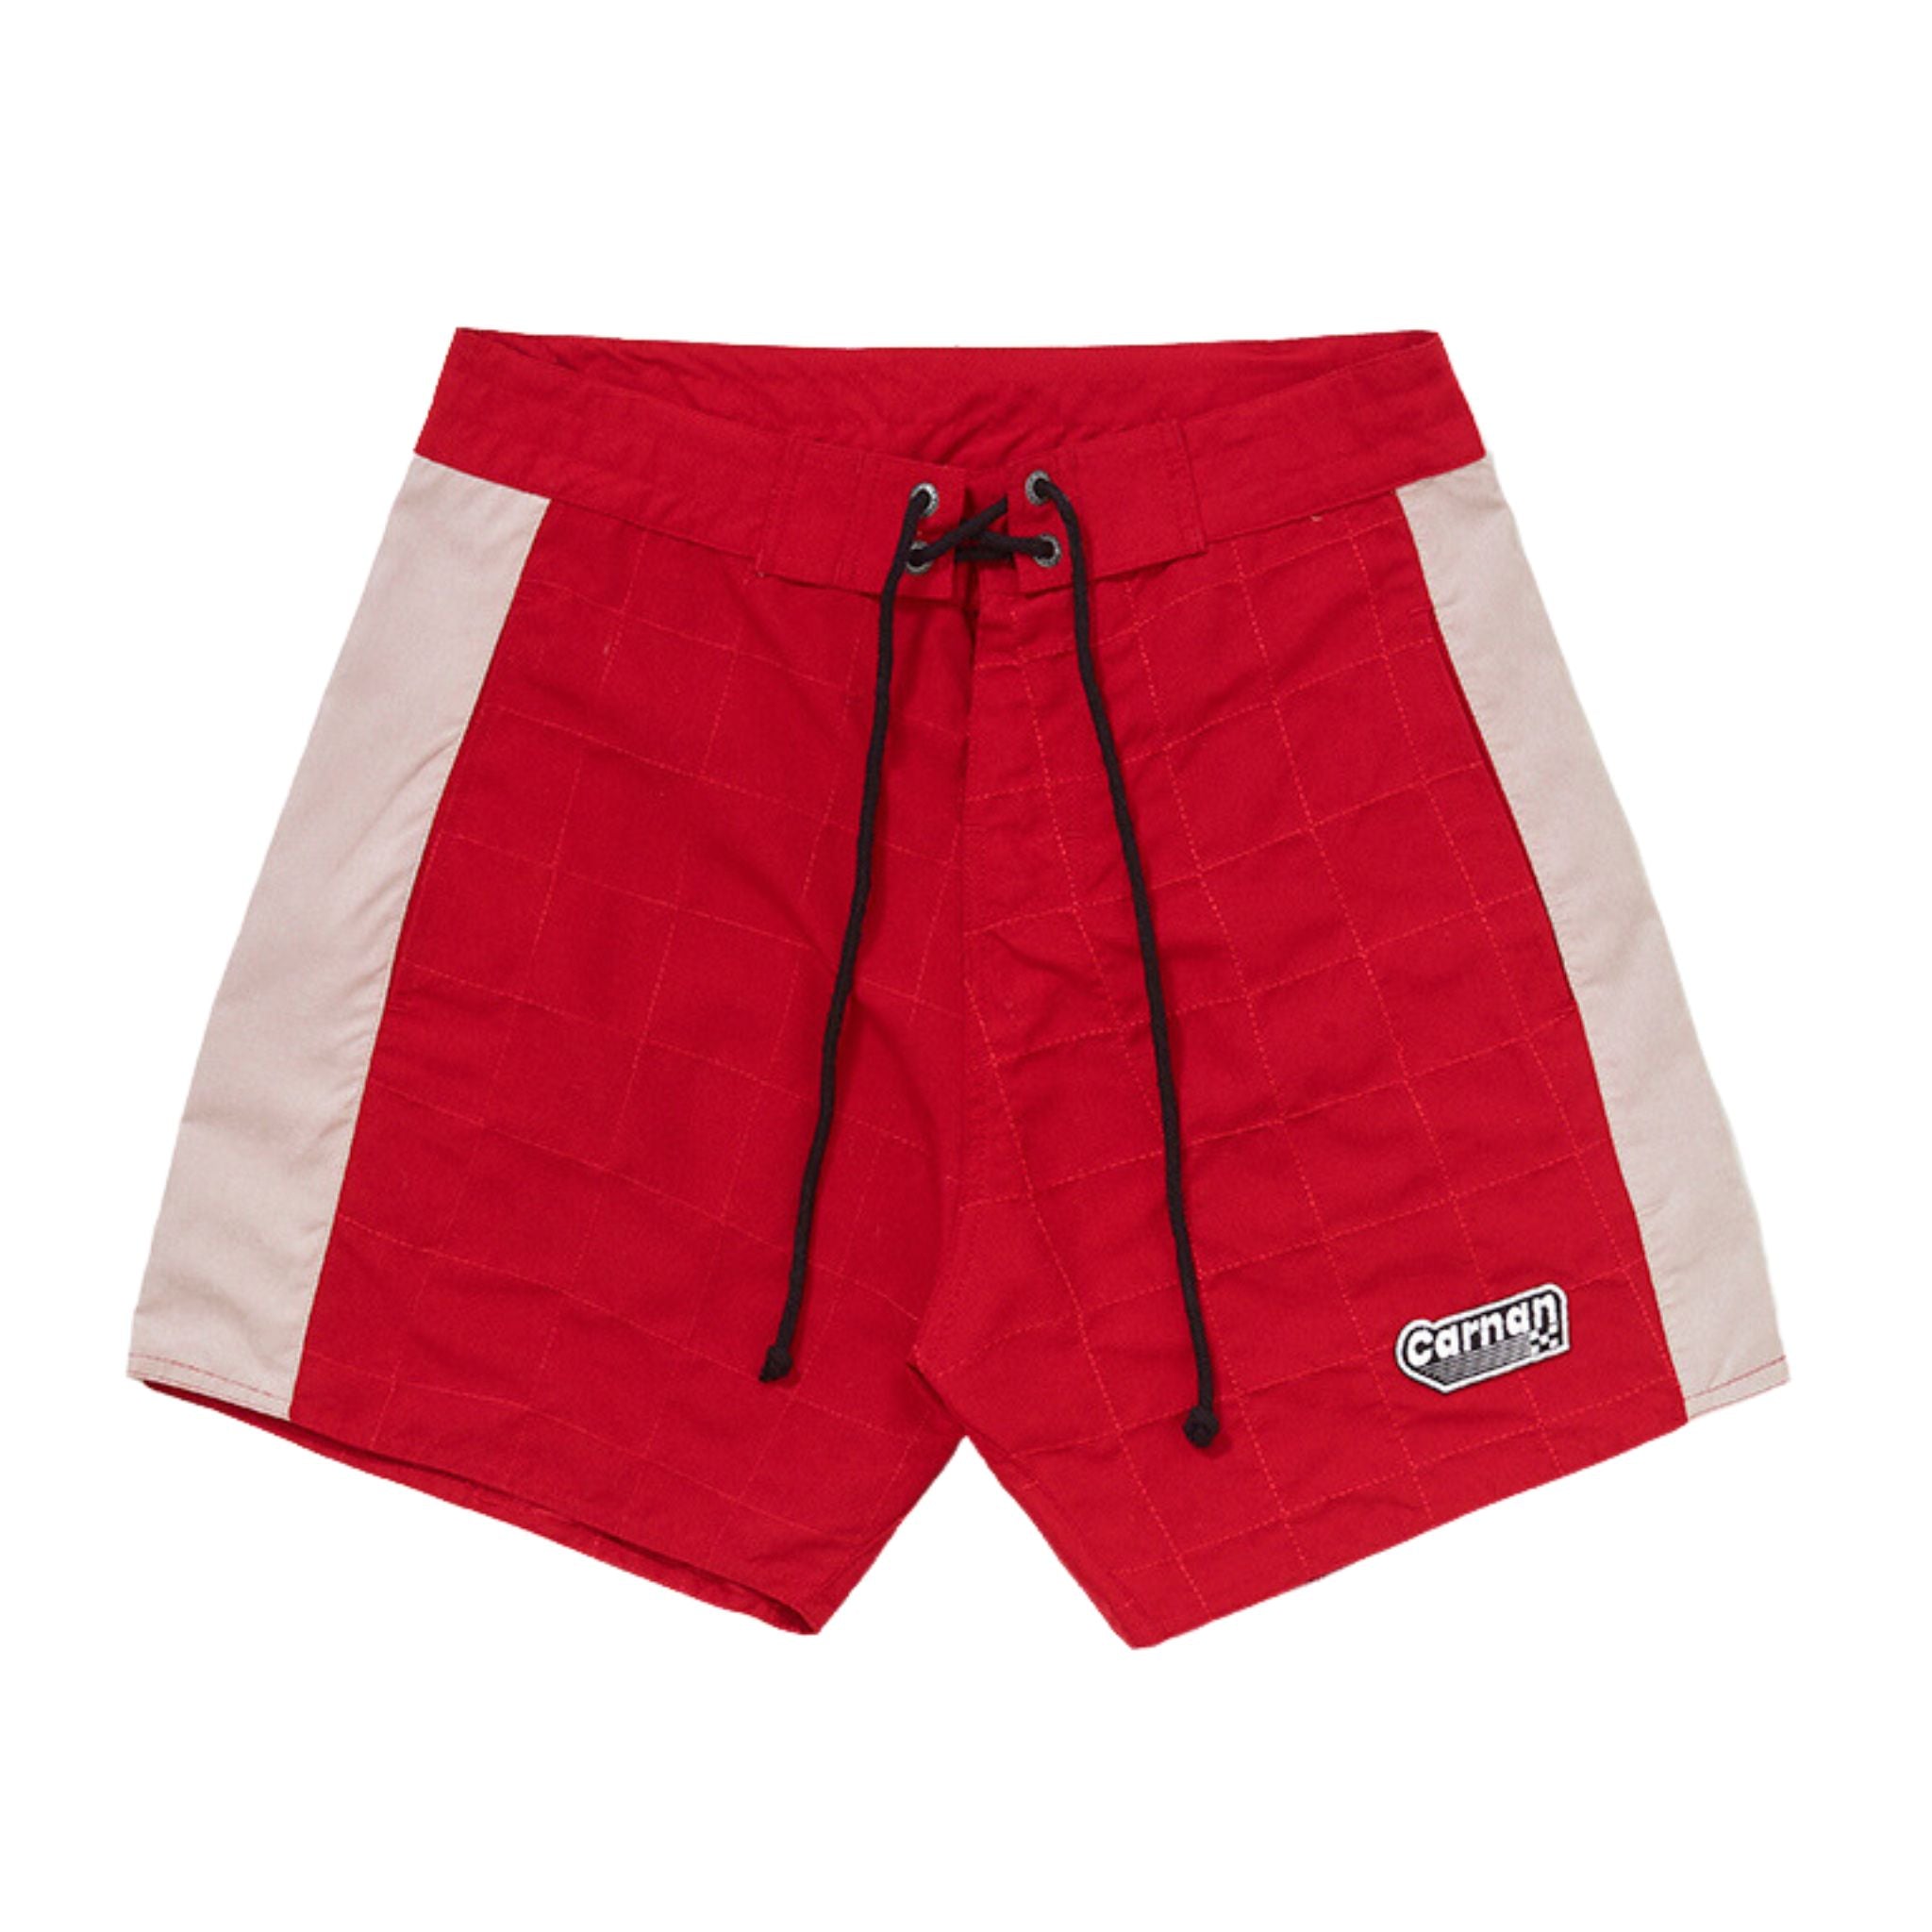 CARNAN - Chessboard Boardshort "Red" - THE GAME